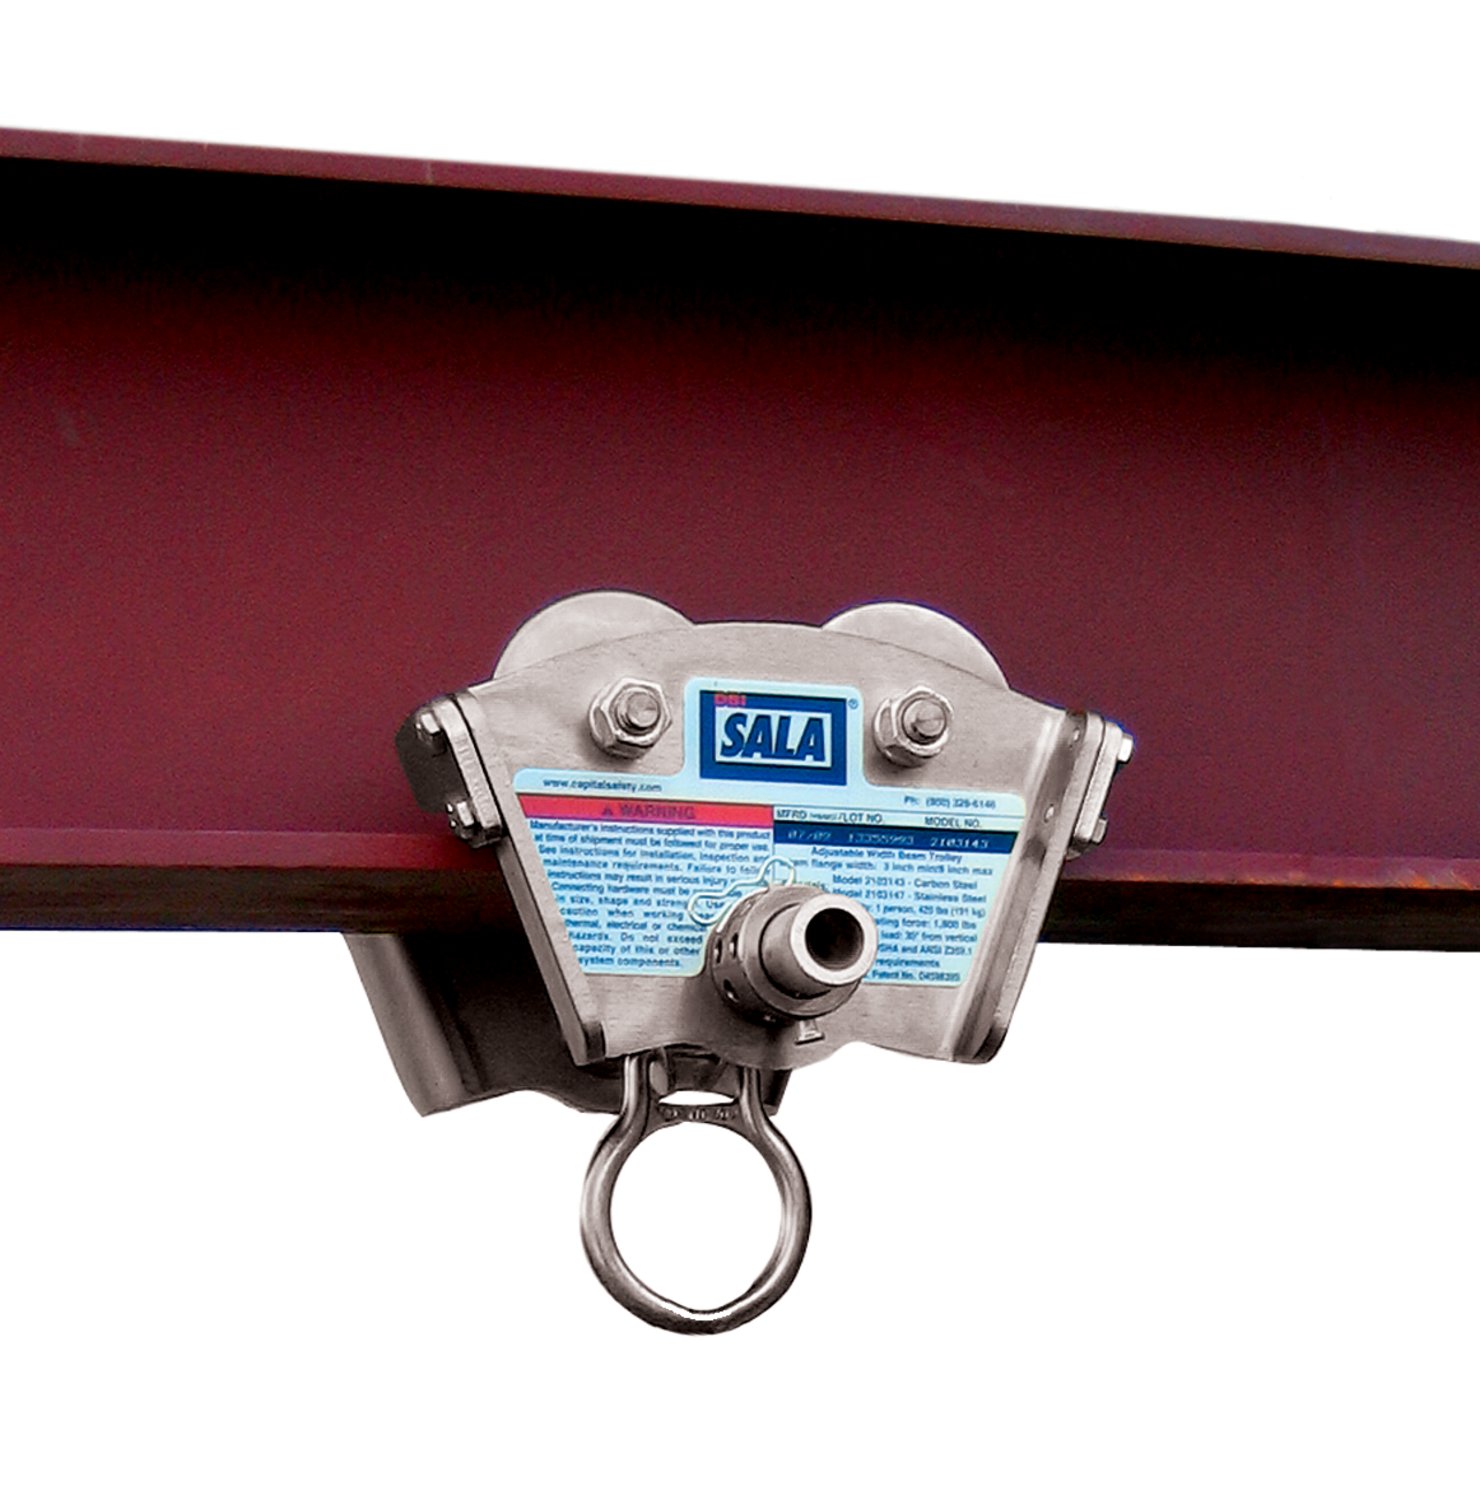 7100260111 - 3M DBI-SALA I-Beam Trolley Anchor 2103147, Stainless Steel, Fits 3 - 8 in Wide, 11/16 in Thick